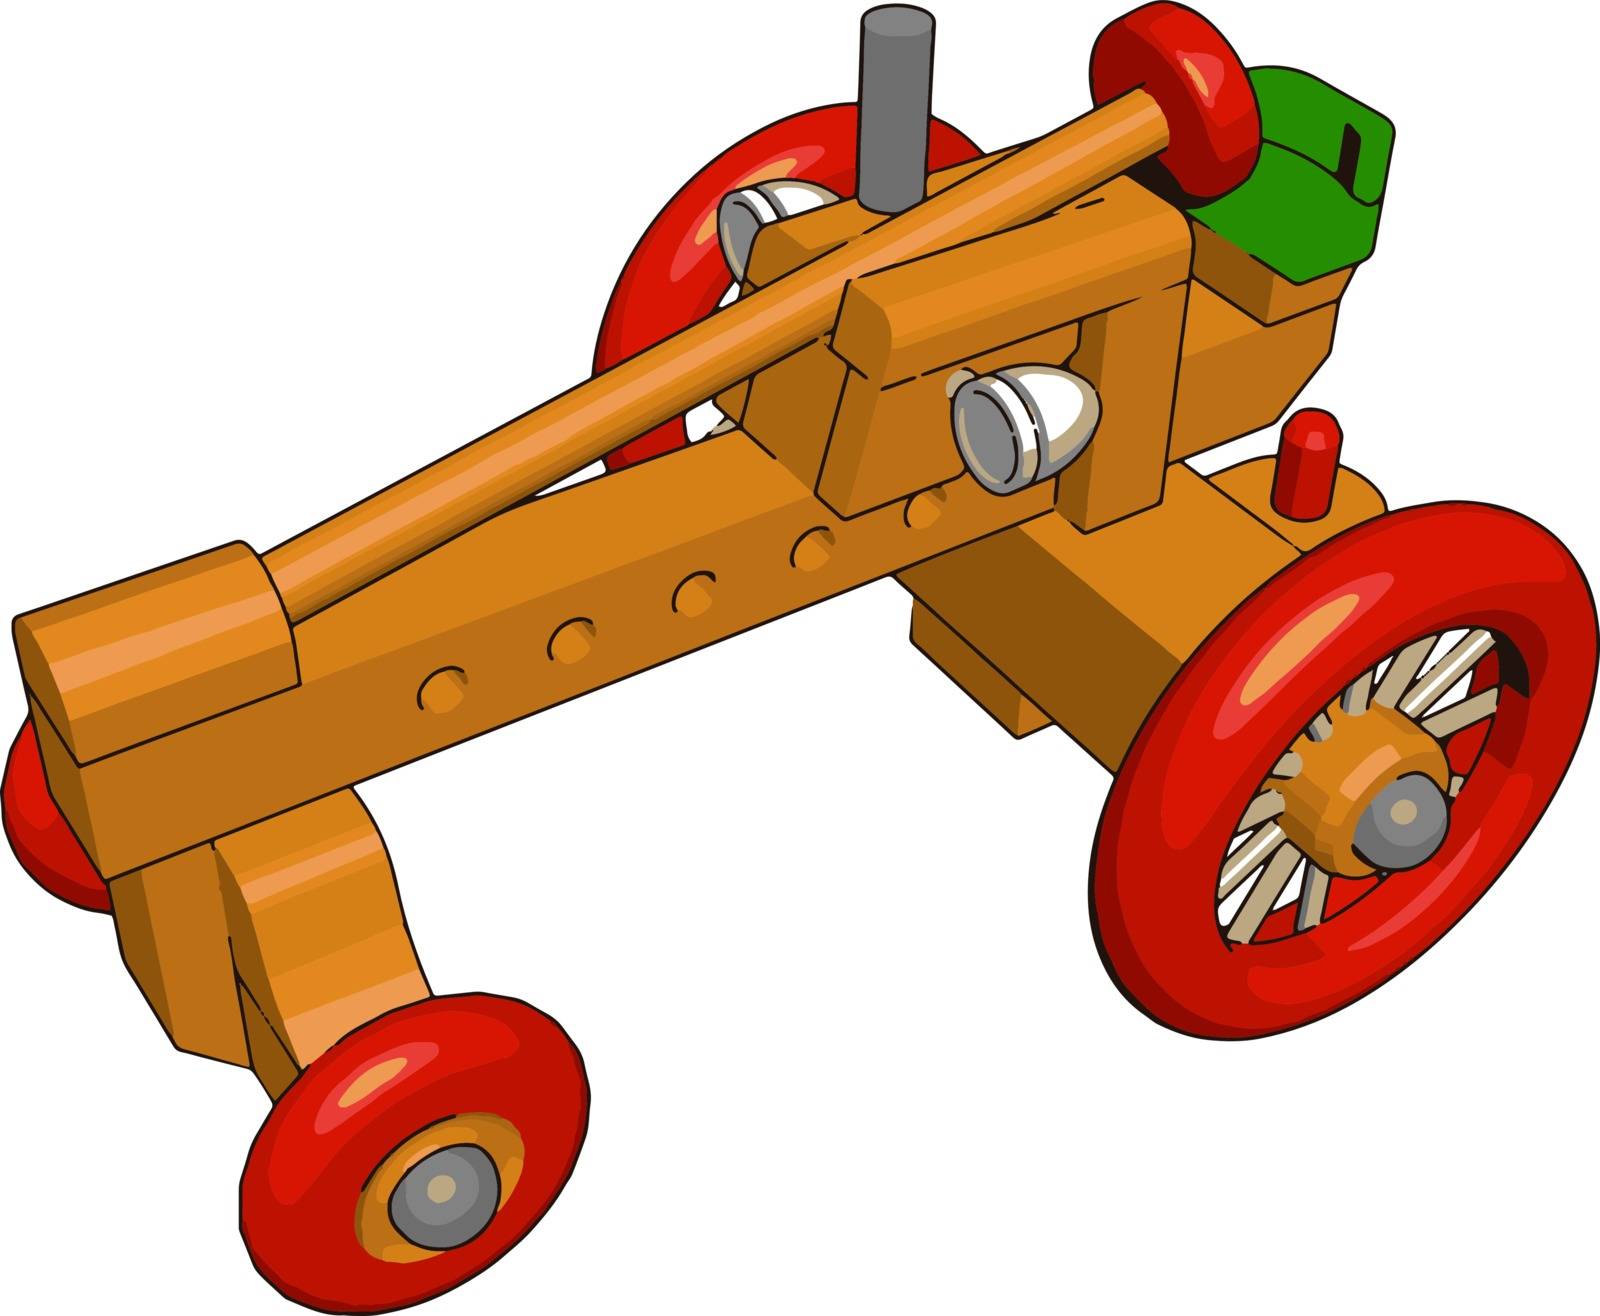 Red tractor toy, illustration, vector on white background.